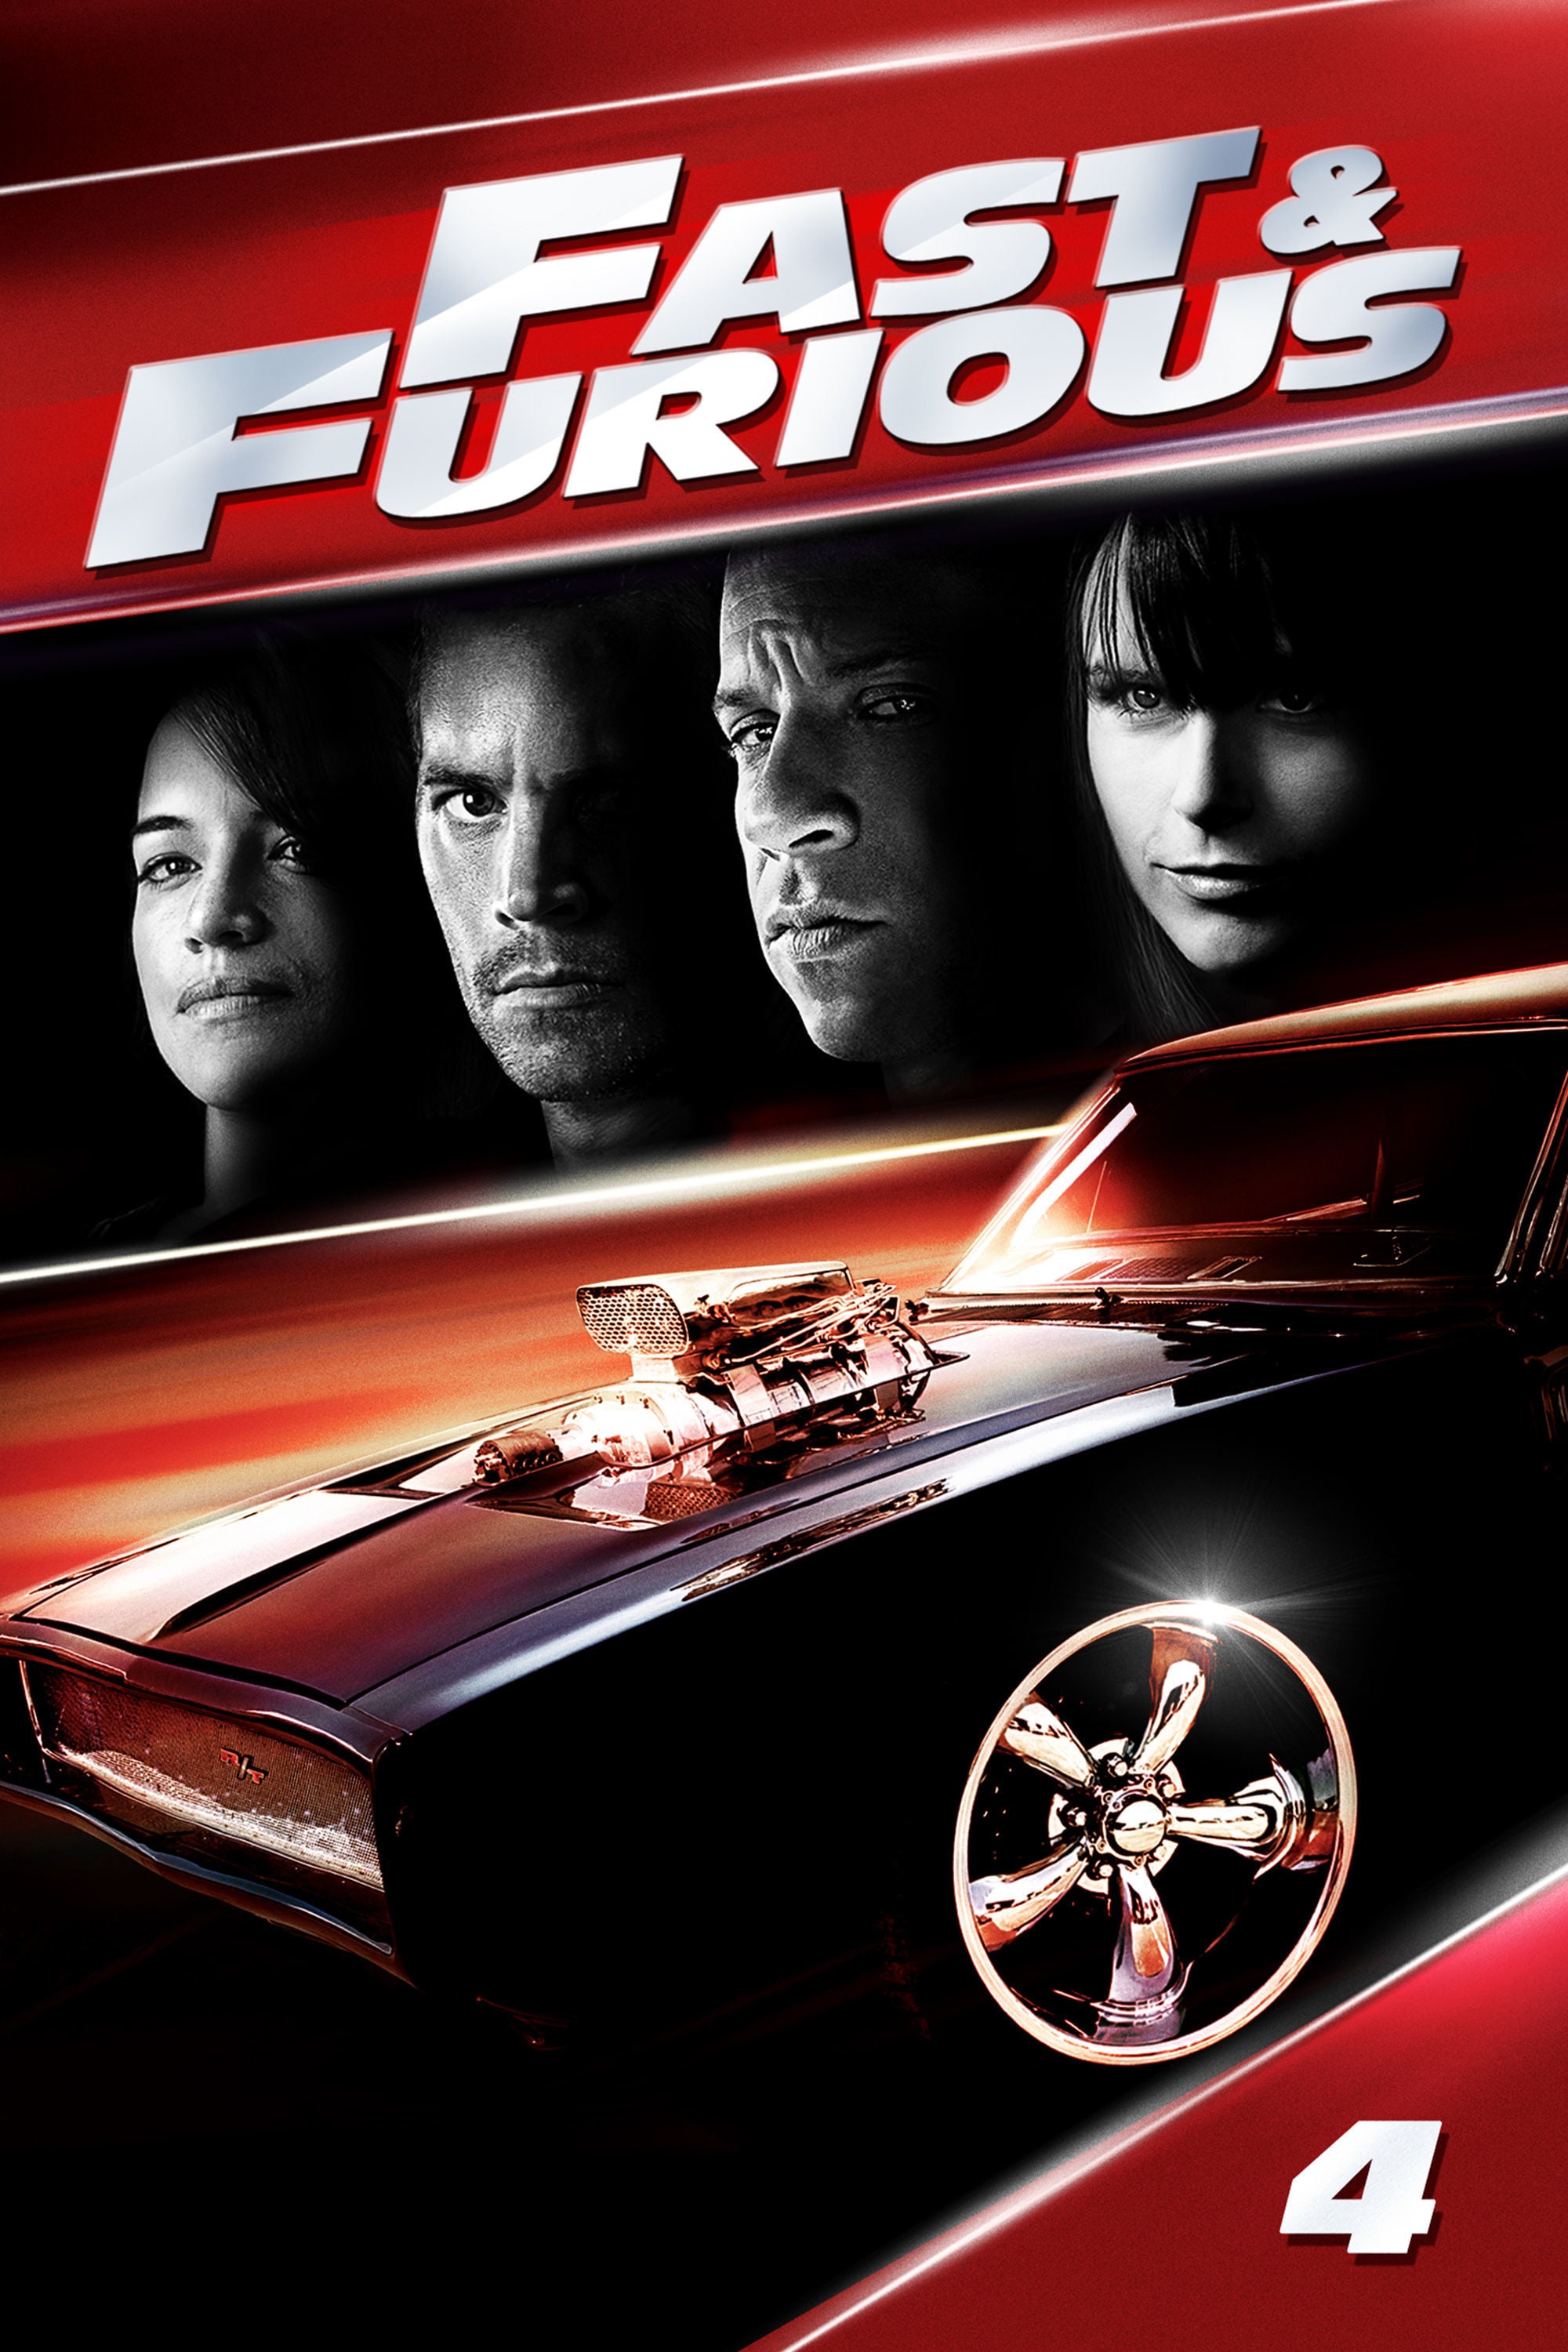 Fast & Furious (film) The Fast and the Furious Wiki FANDOM powered